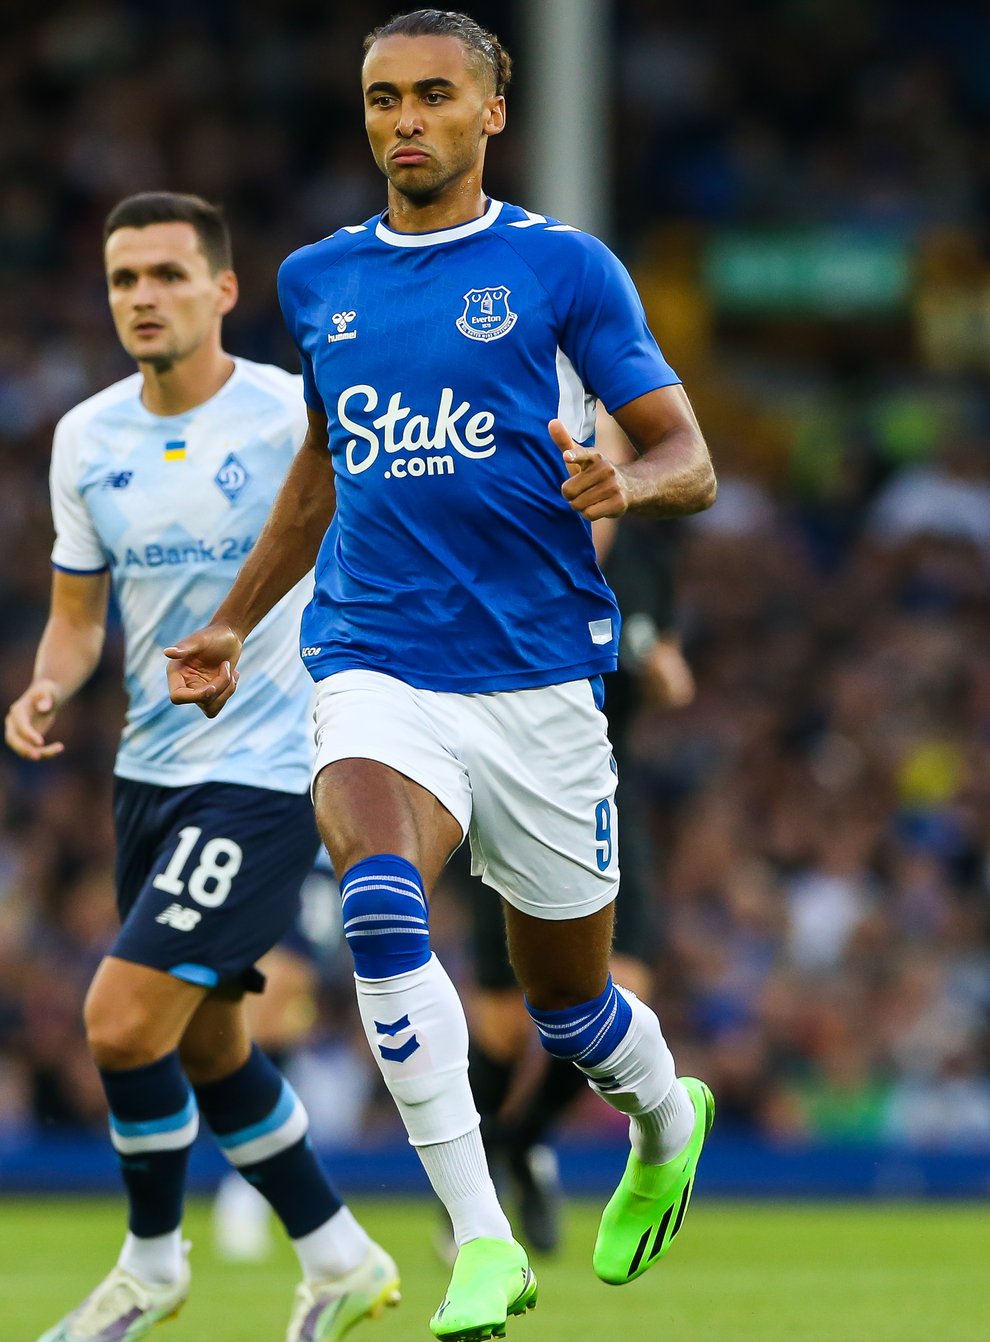 Dominic Calvert-Lewin will not feature for Everton against Chelsea (Barrington Coombs/PA)